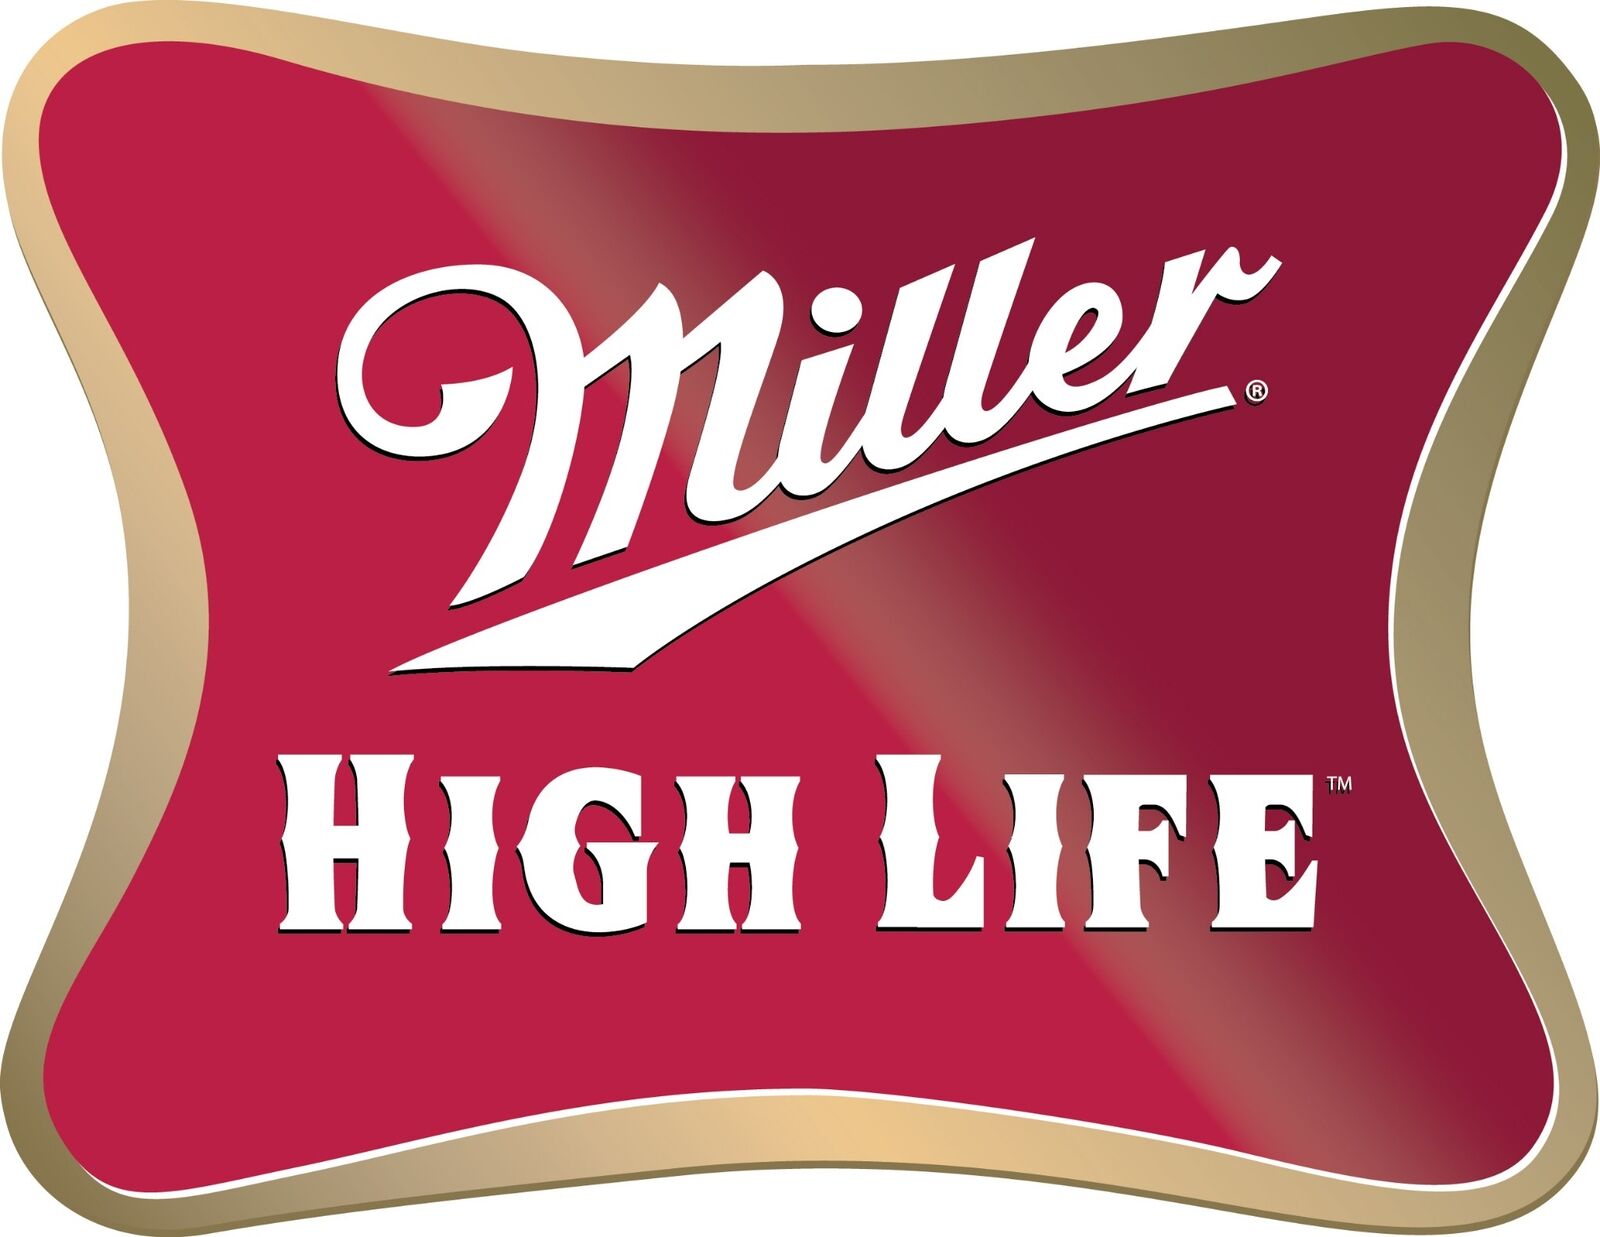 Miller High Life Beer Vinyl Decal / Sticker 10 sizes Tracking 